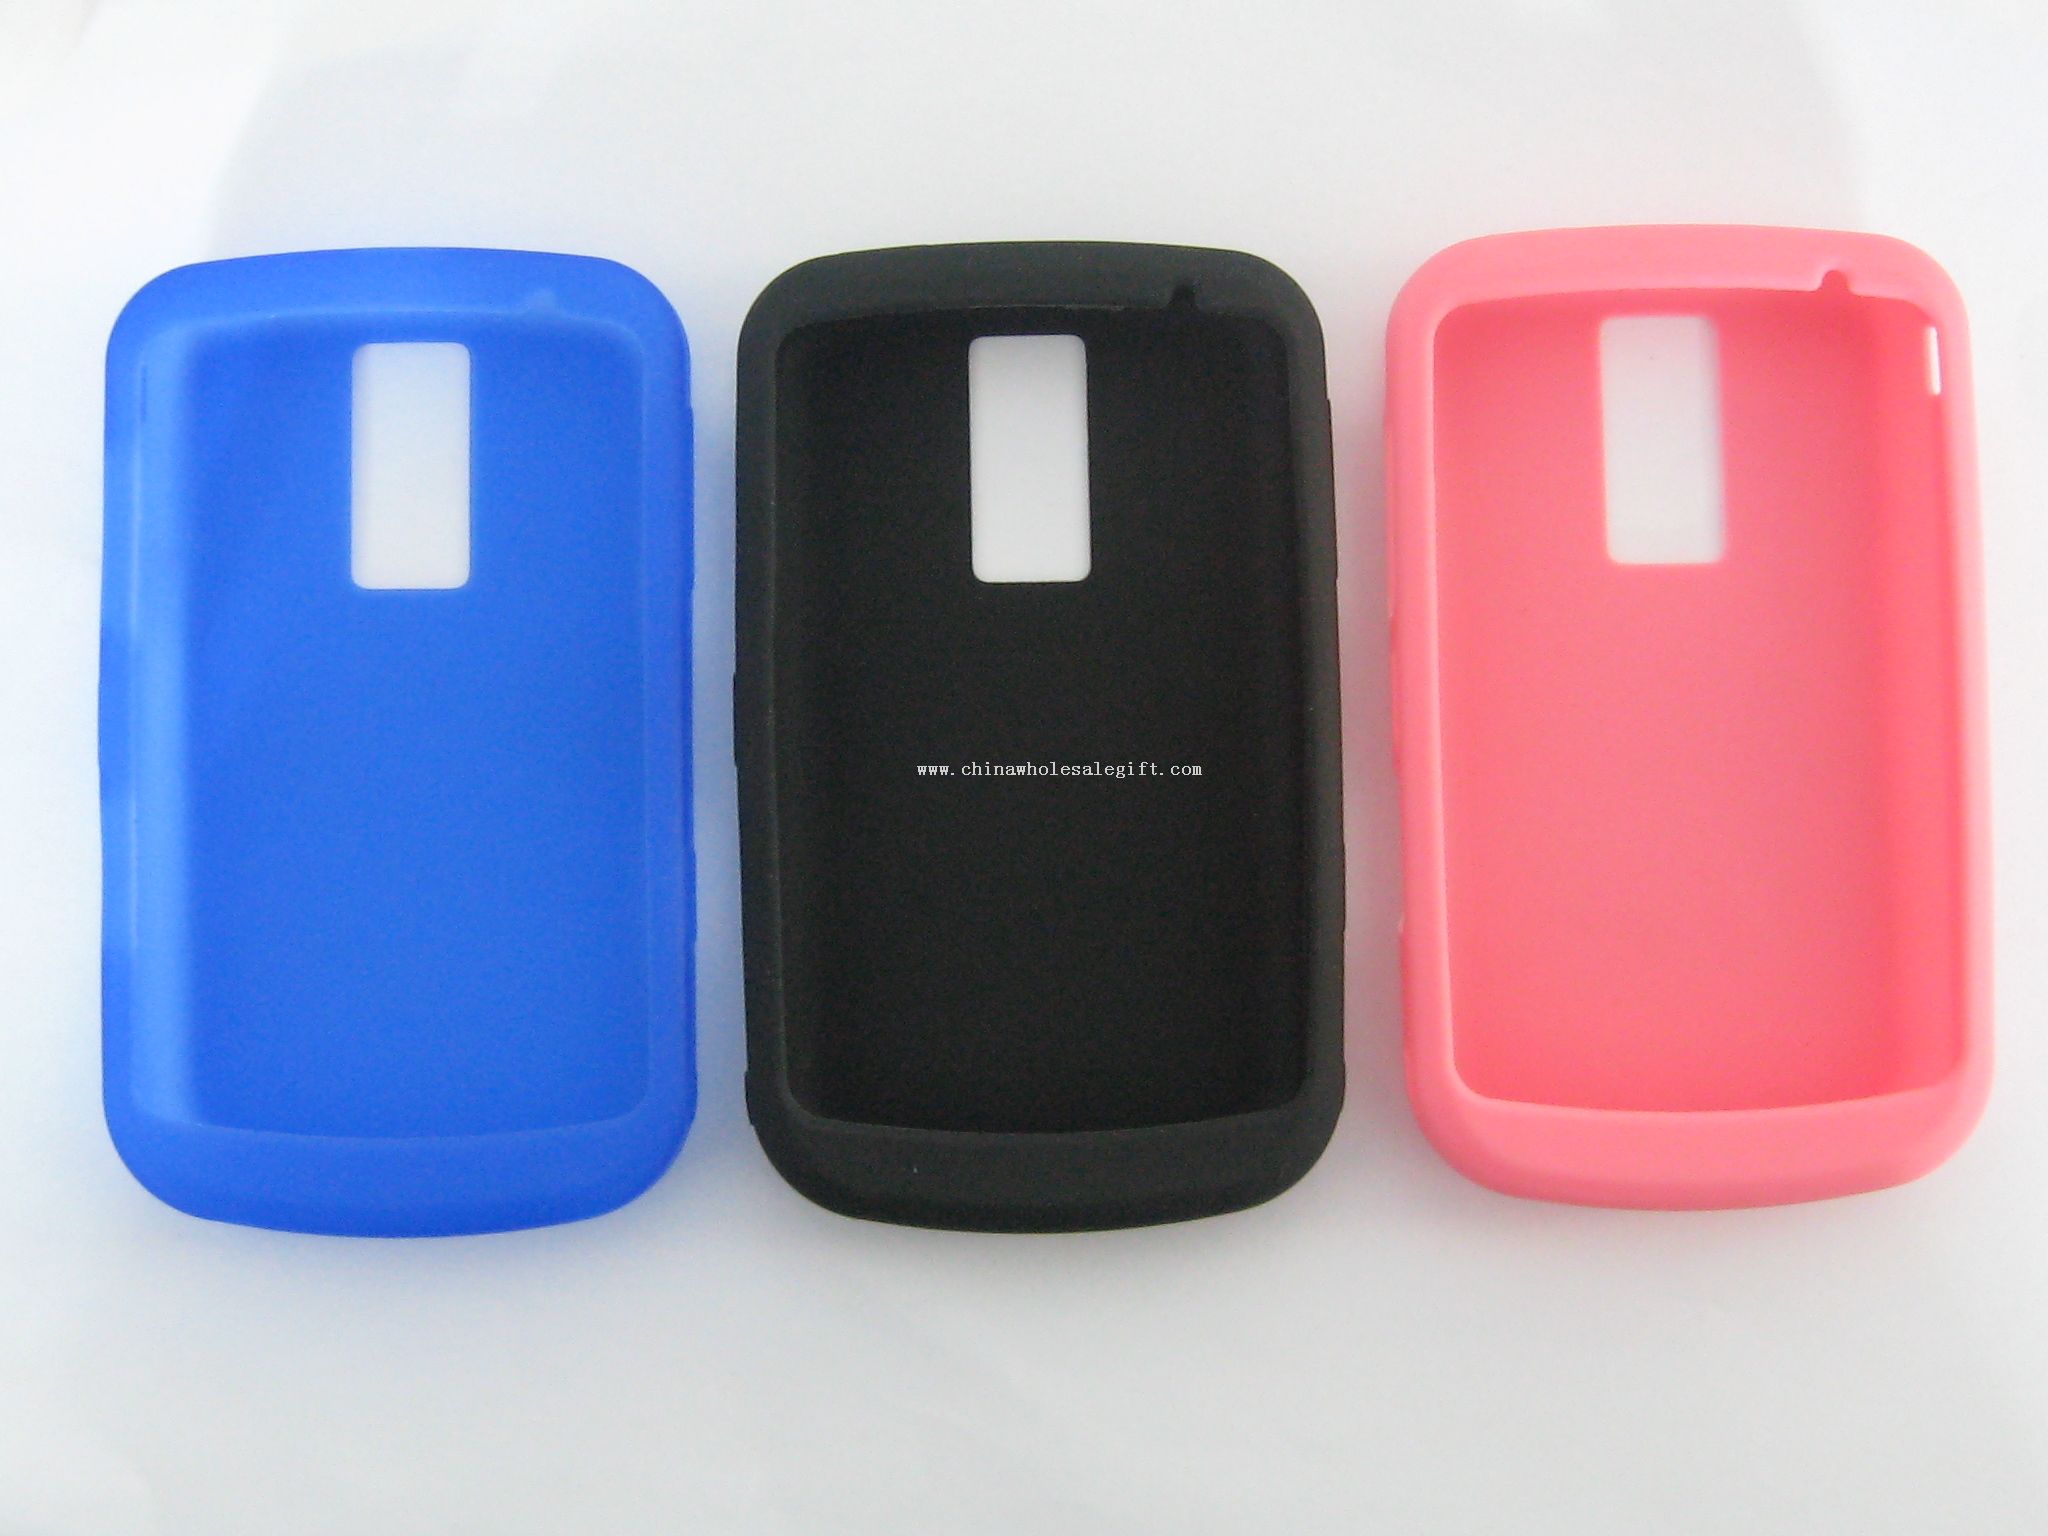 Blackberry9000 in silicone